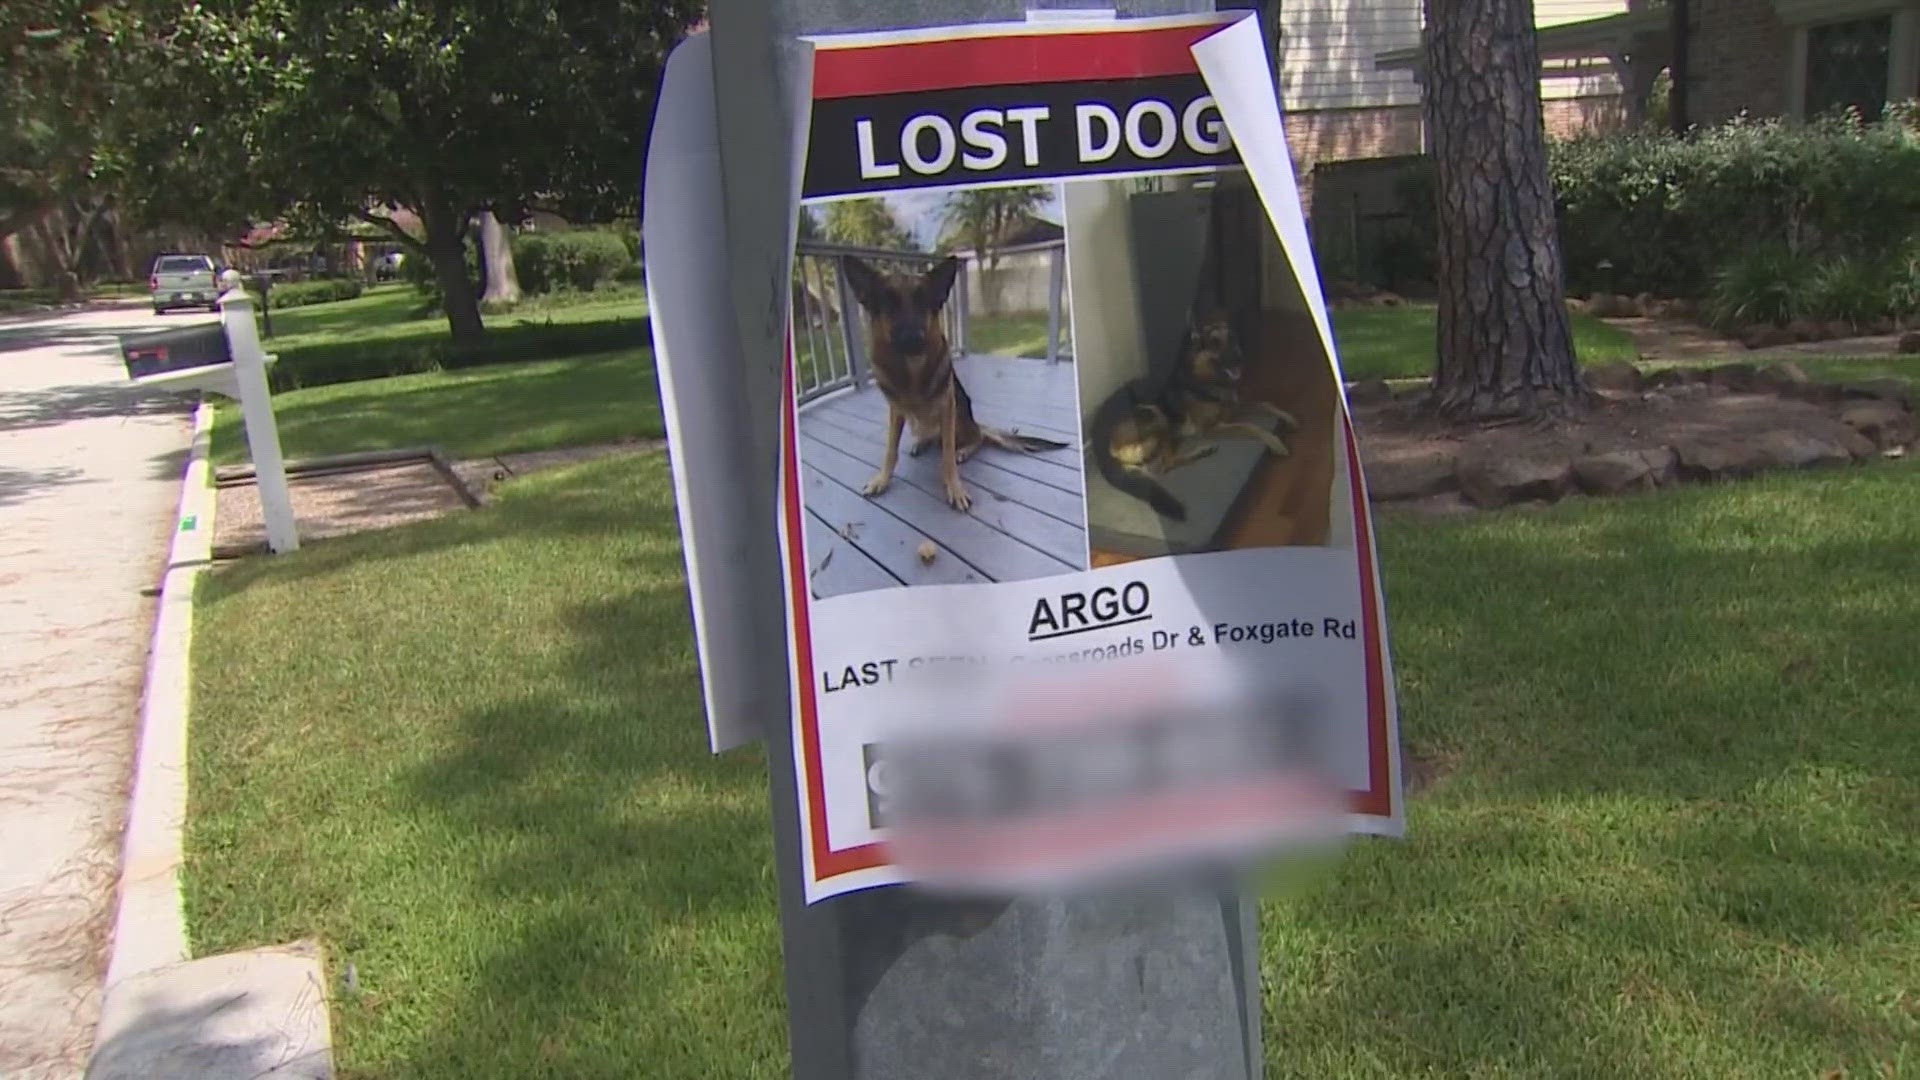 Argo the dog went missing after its owners dropped him off to a trusted dog sitter they found on Rover.com.